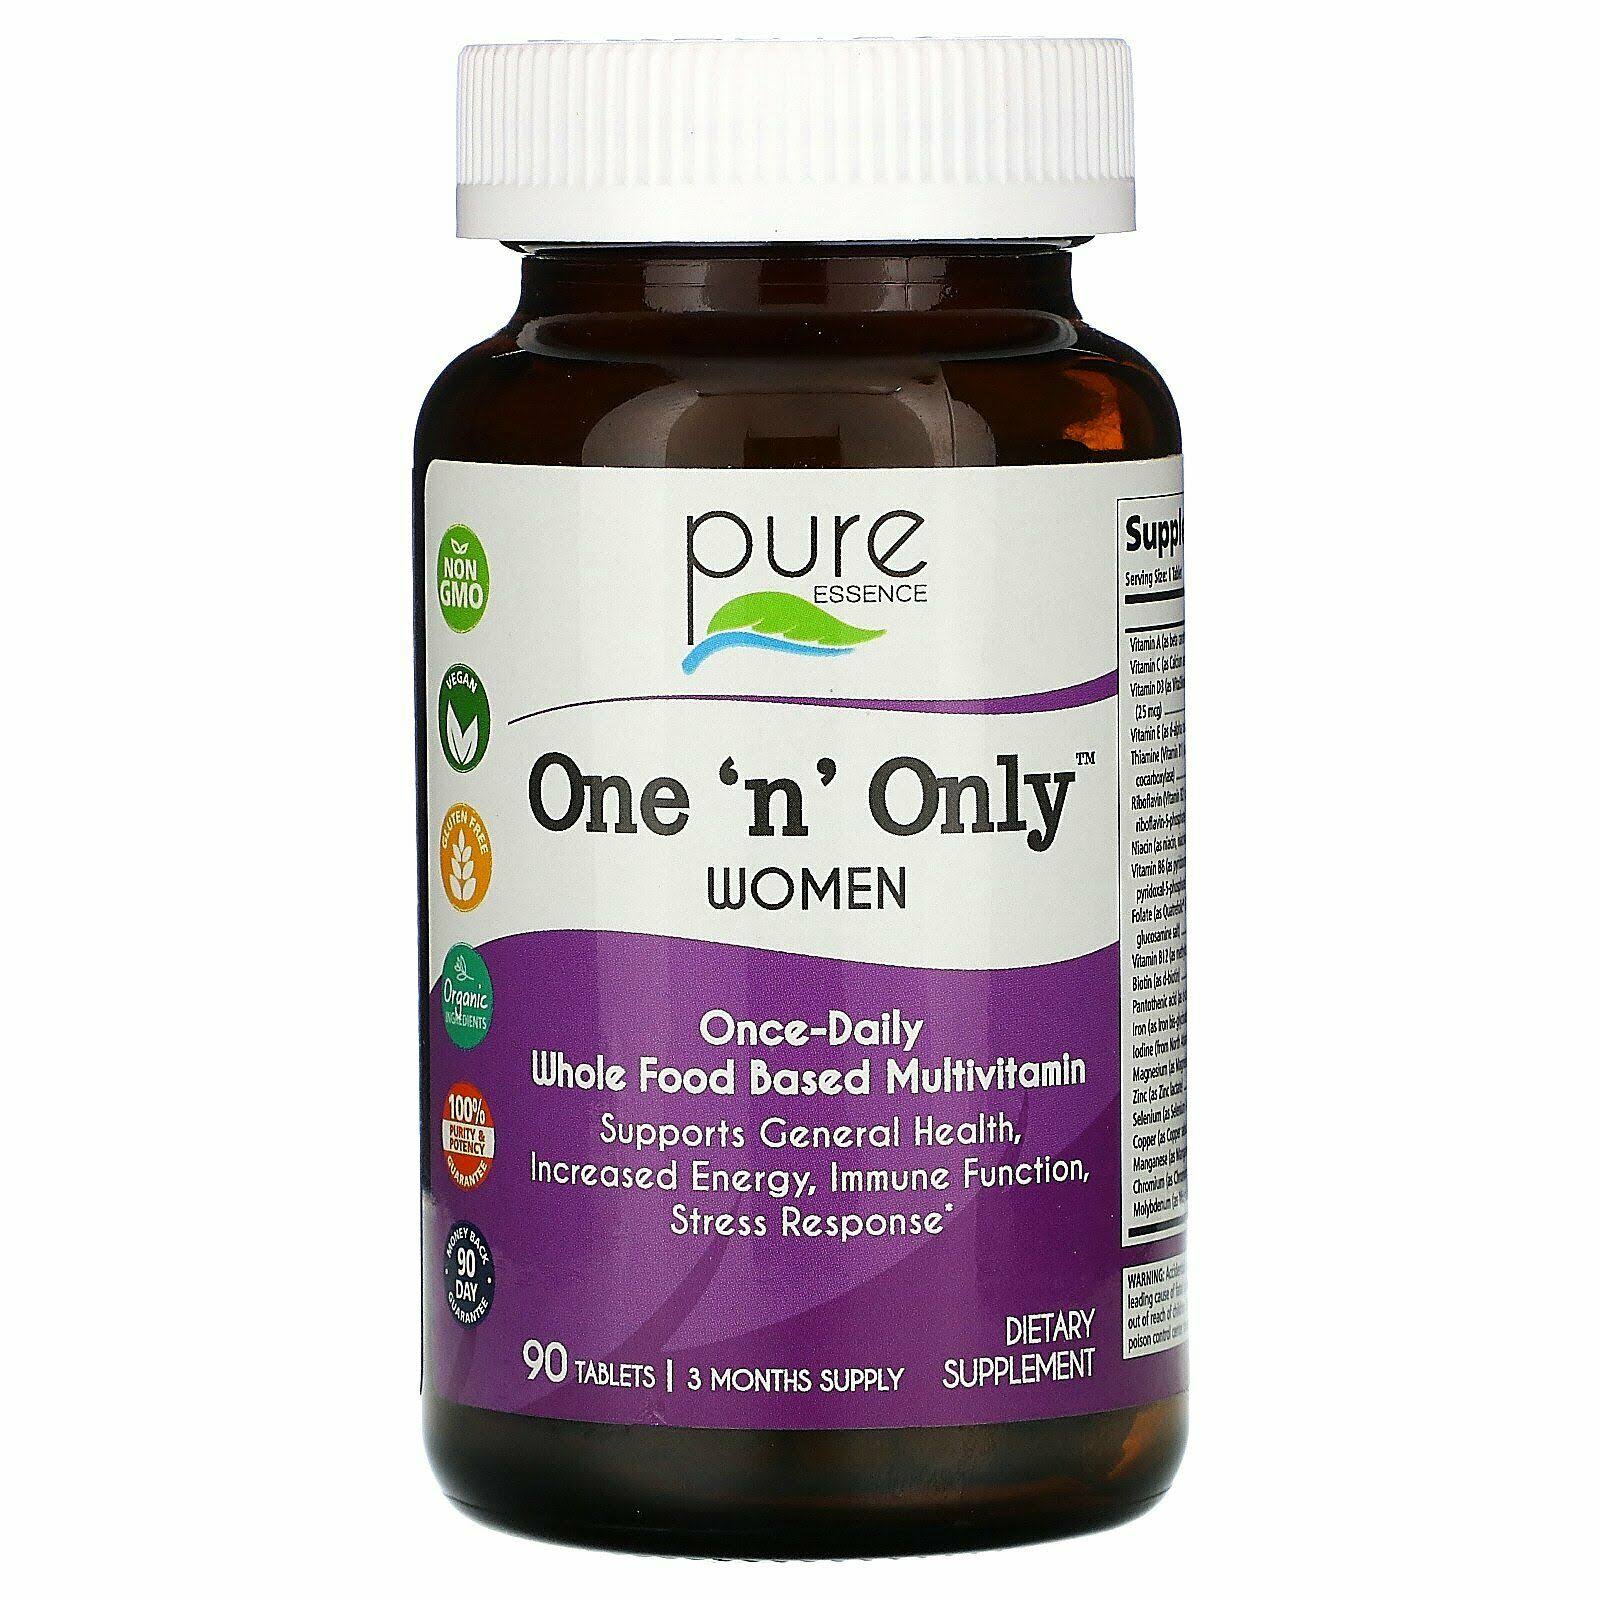 Pure Essence Labs One n Only Women's Formula Supplement - 90 Tablets